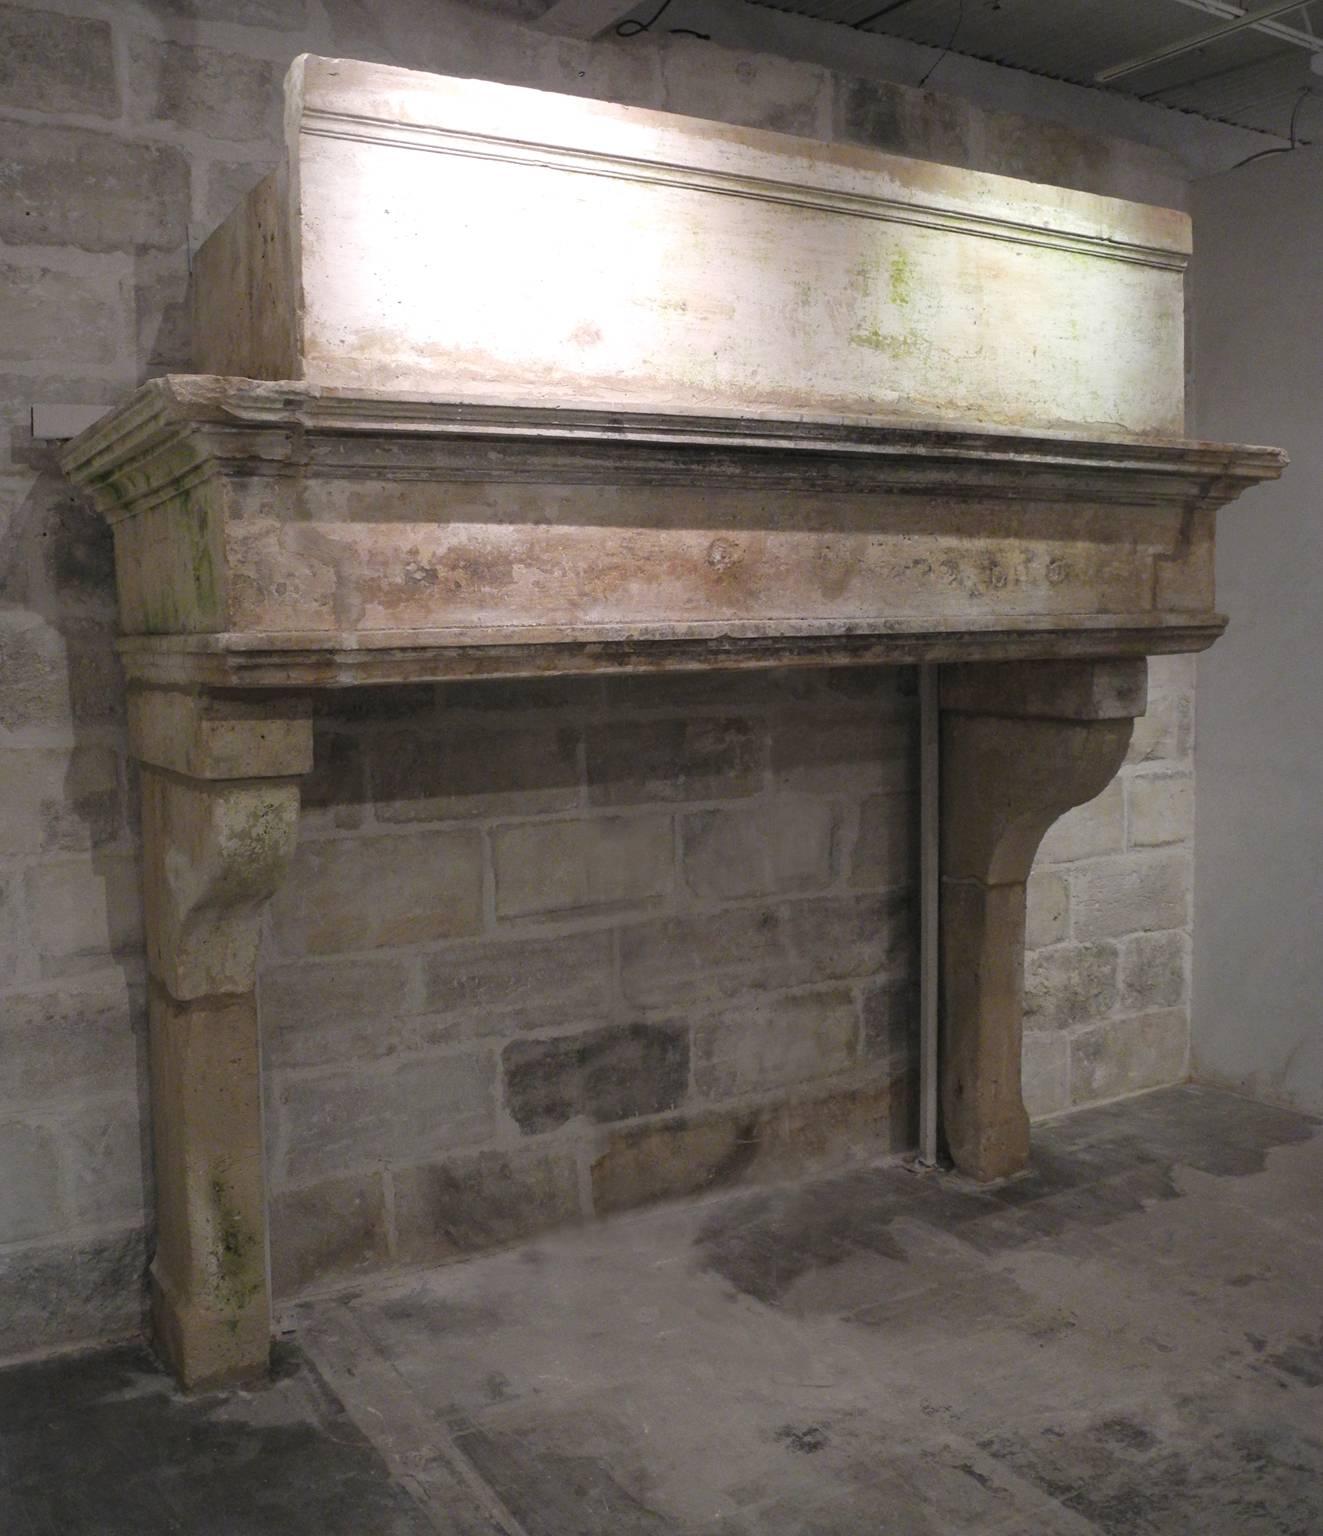 This is a very special antique 18th century fireplace from a grand property in Montmiry-Le-Chateau, a commune in the Jura Department in the Franche-Compte region of France. One of the largest mantels we have carried to date, this piece can serve